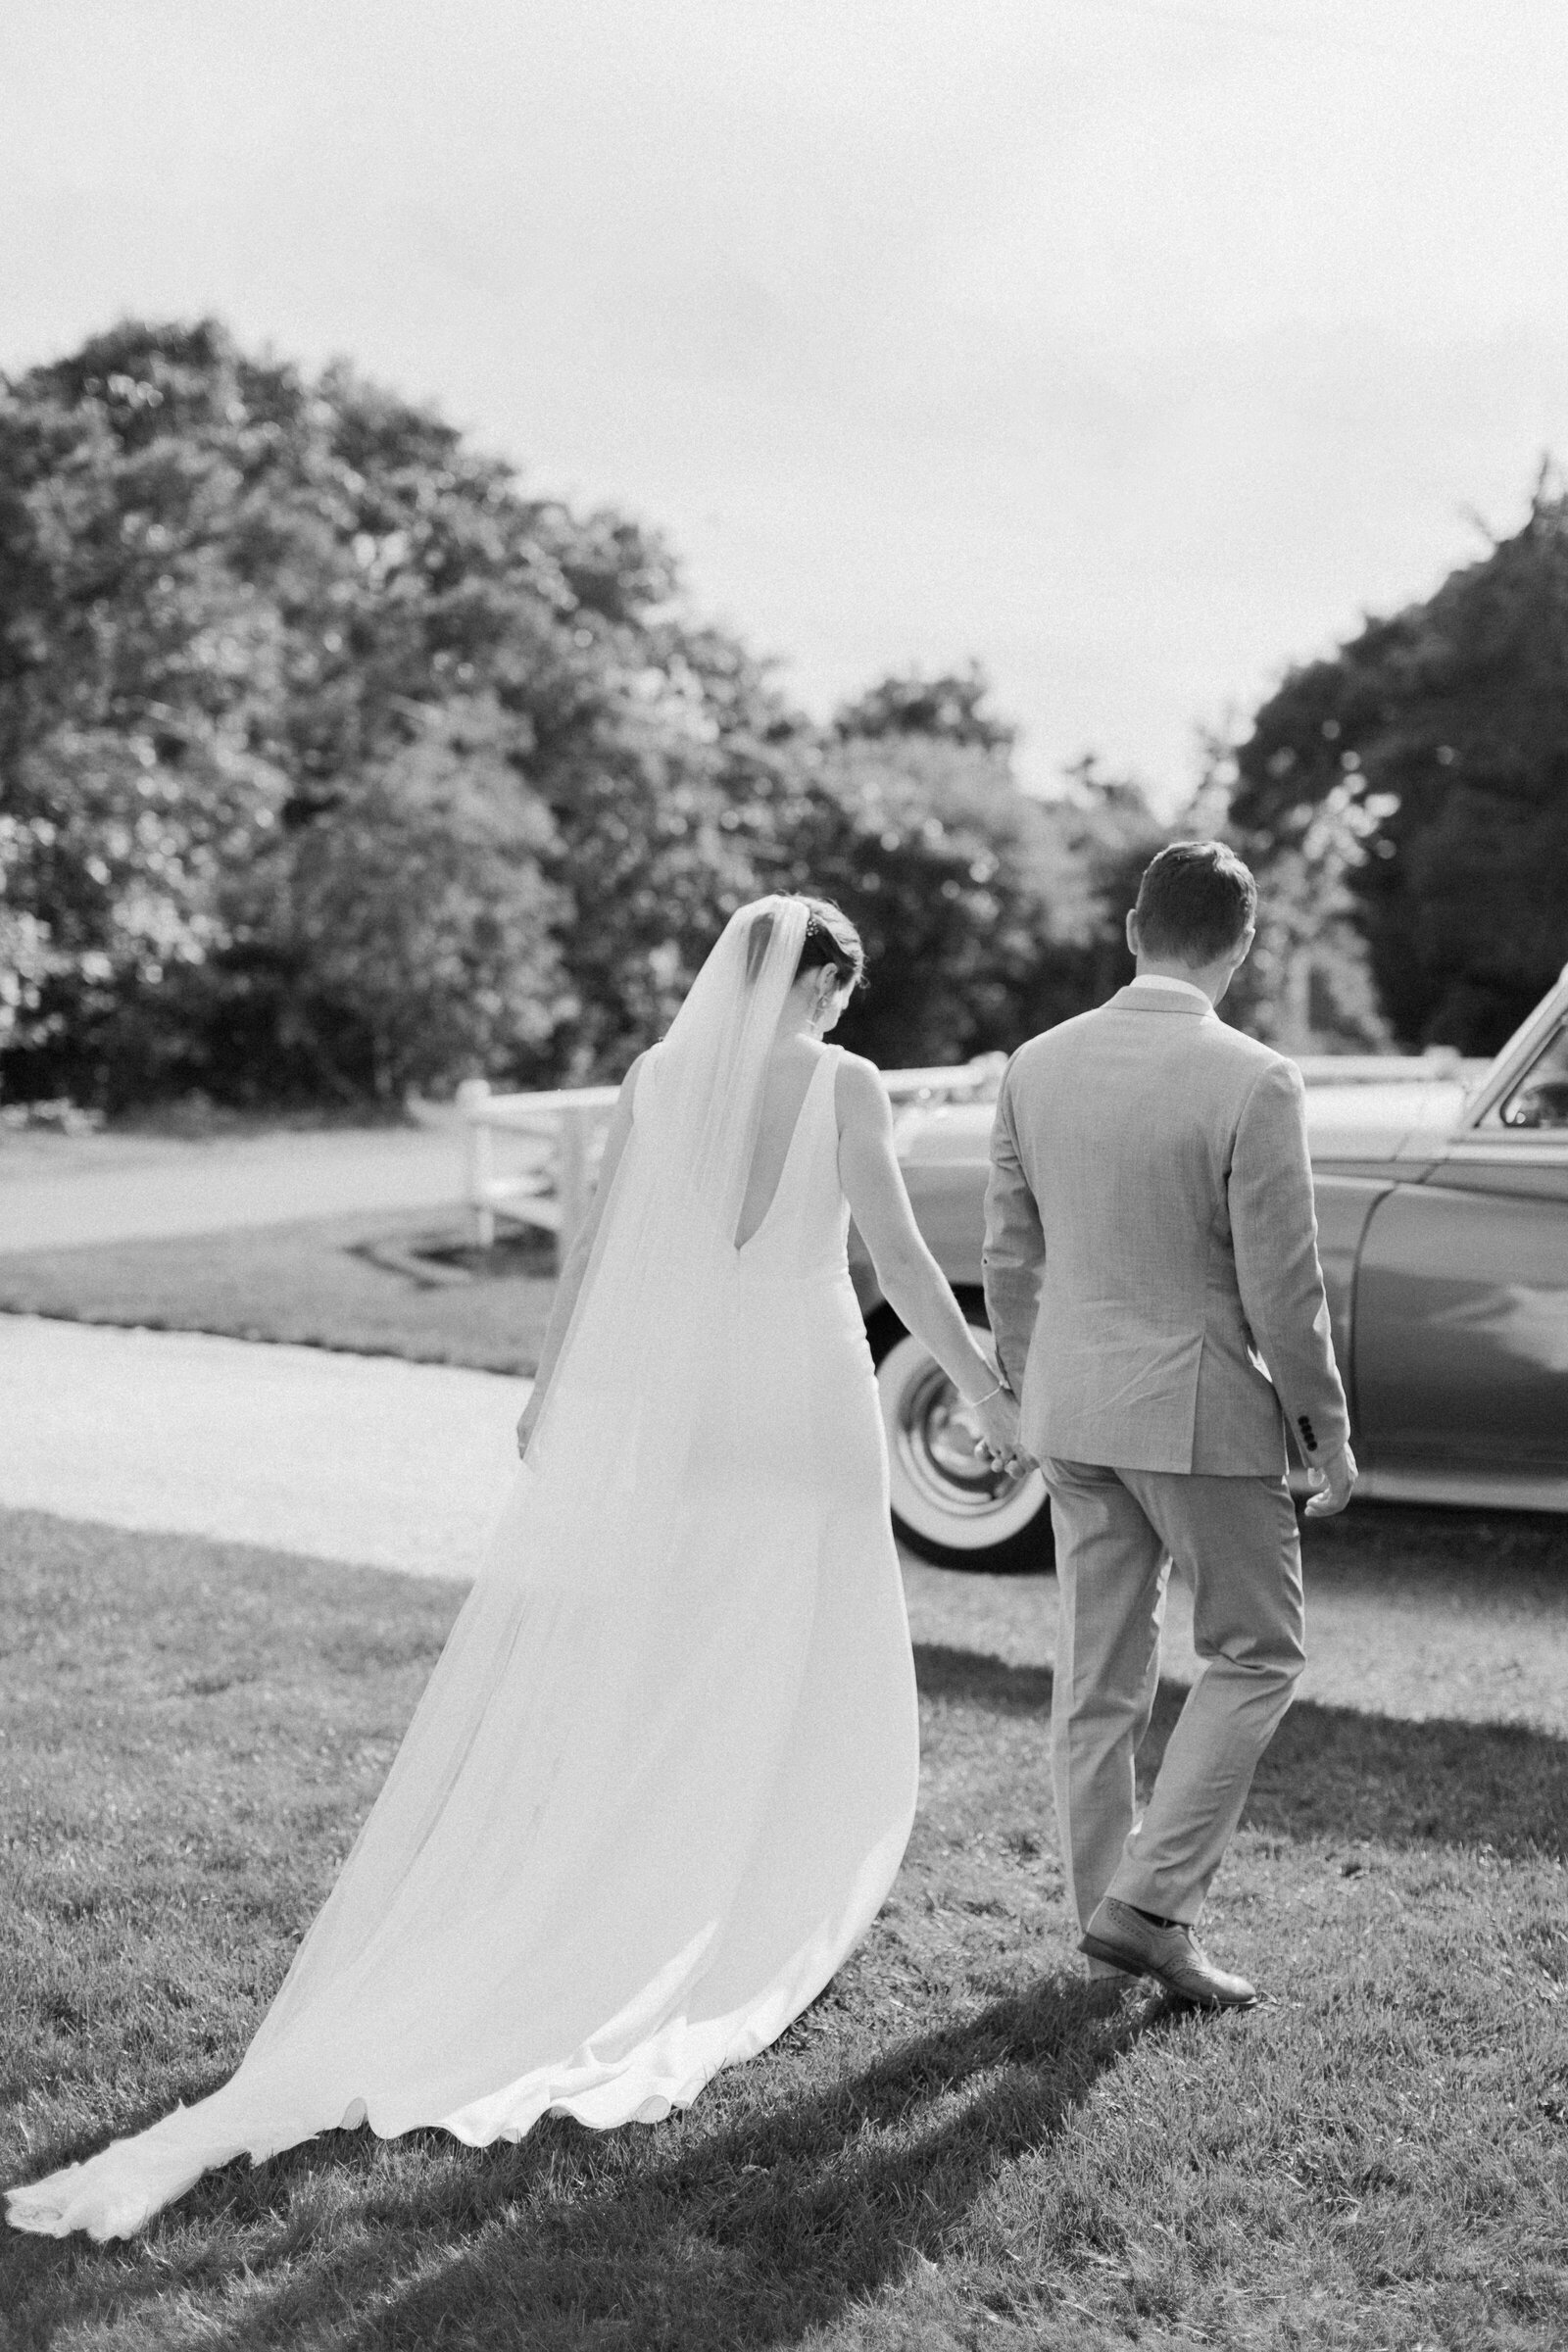 Black and white photo of a couple holding hands and walking towards a car.